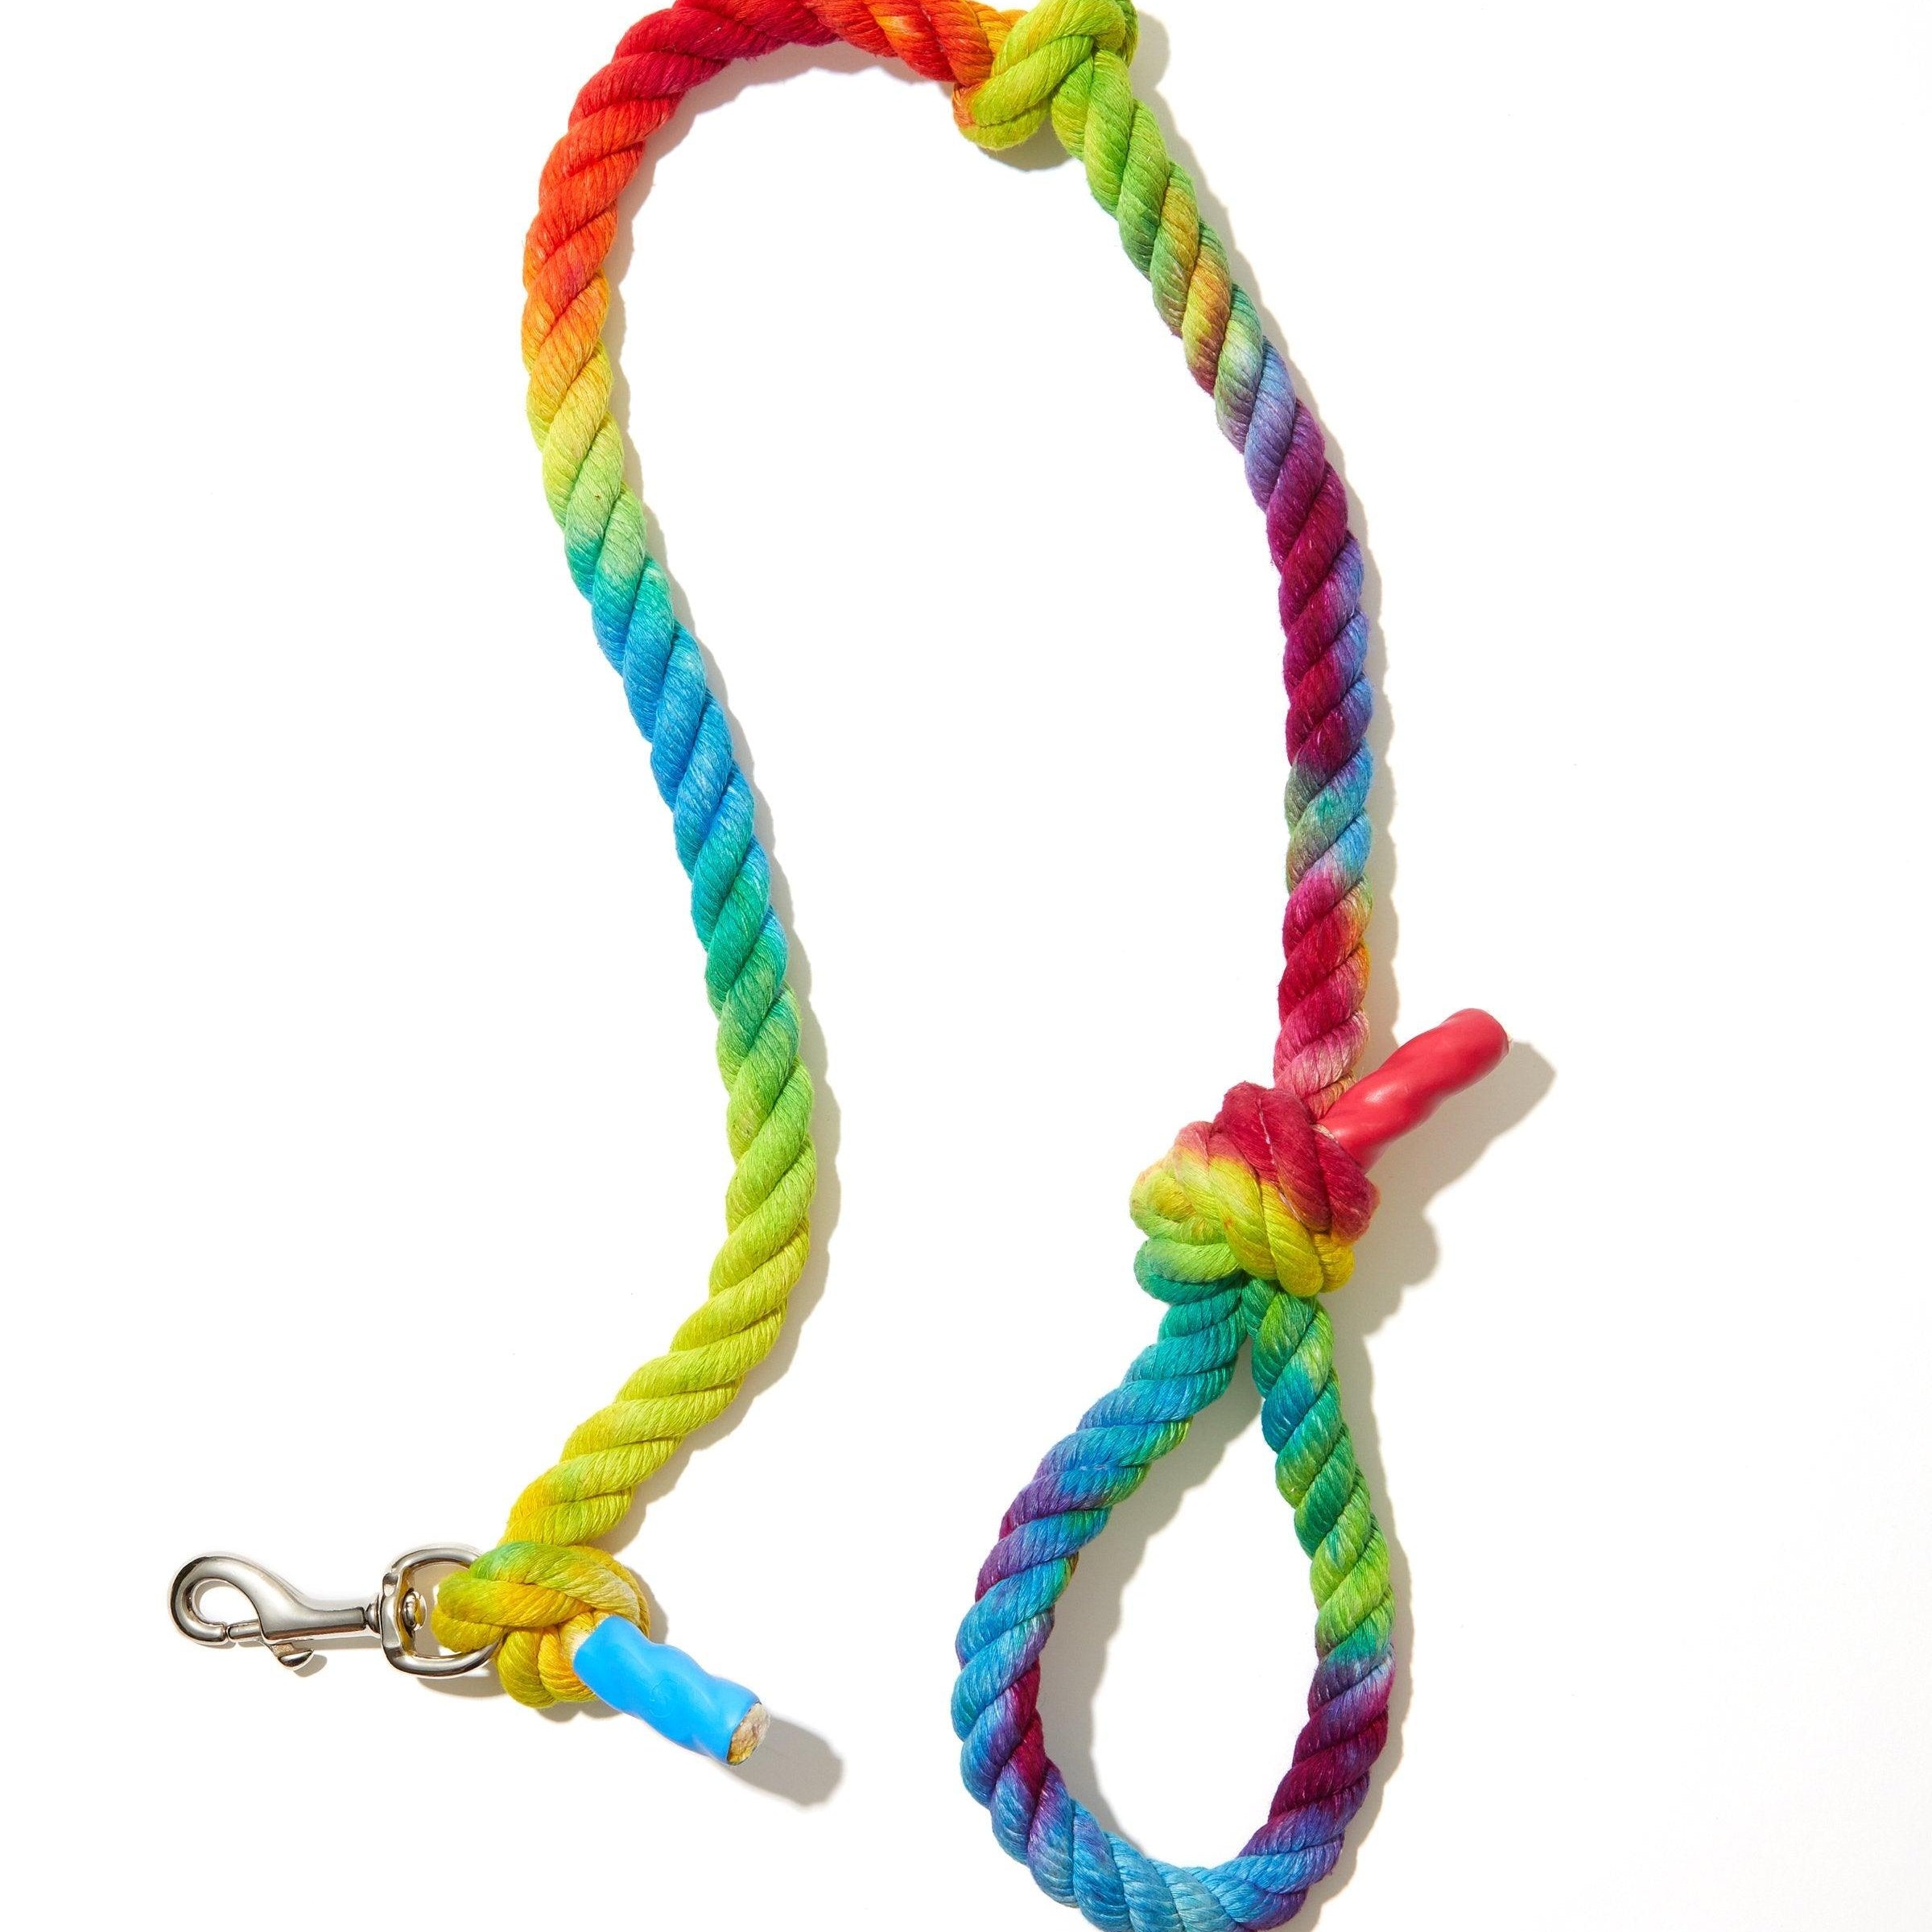 Catskills Indigo Tie-Dyed Rope Leash - Rocky & Maggie's Pet Boutique and Salon